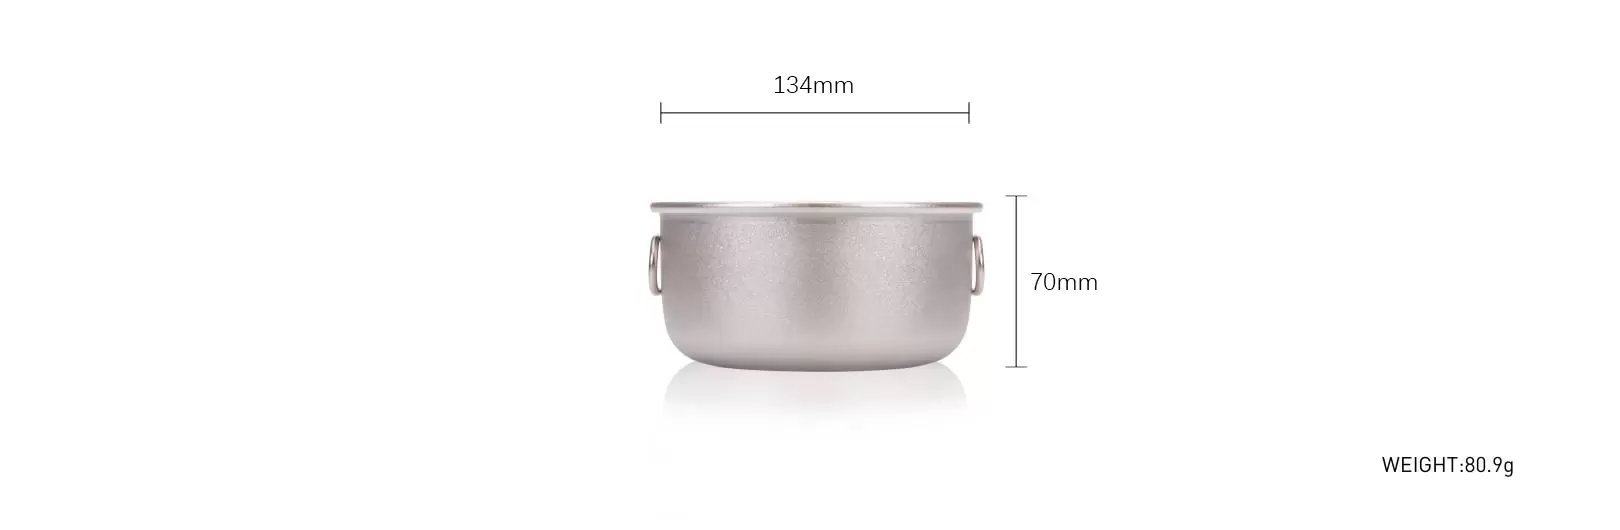 details of Ultralight Titanium Cookware with Foldable Handles